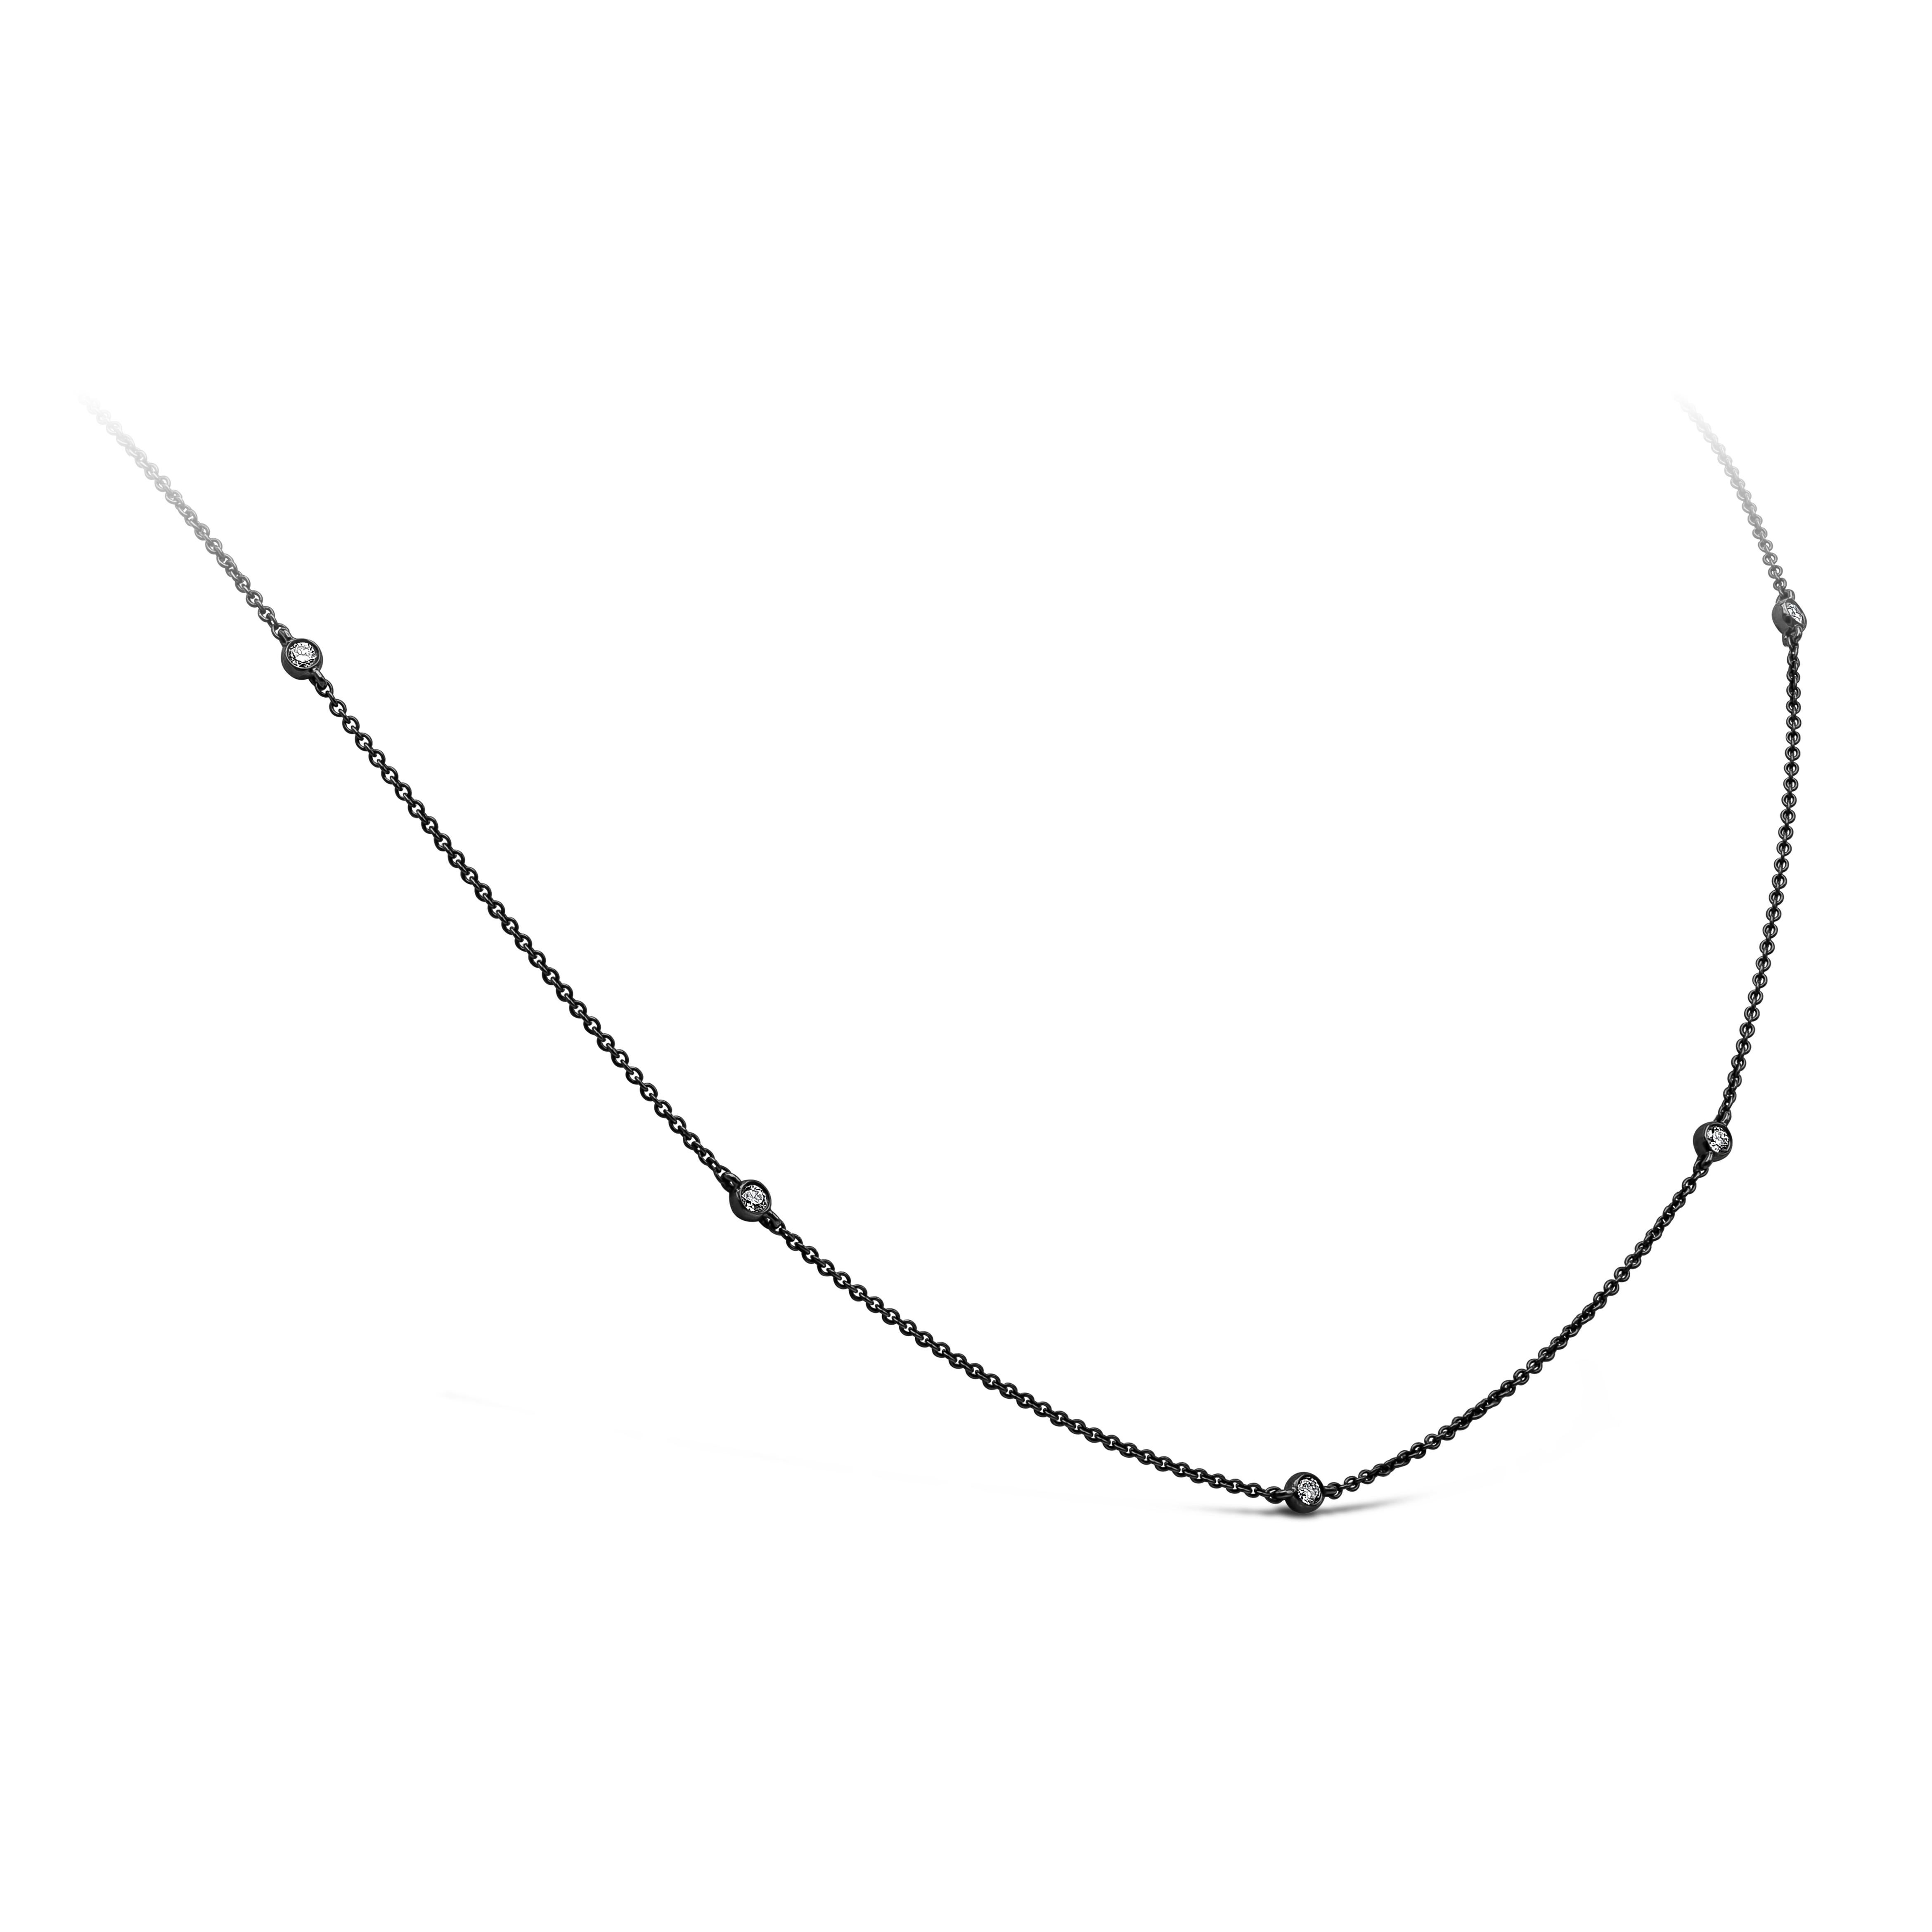 A chic piece of jewelry showcasing a round brilliant diamonds, spaced evenly in an 18K black rhodium finished chain. Diamonds weigh 0.32 carats total. Necklace length is 22 inches but can be worn as a 20 inch necklace as well. 

Roman Malakov is a